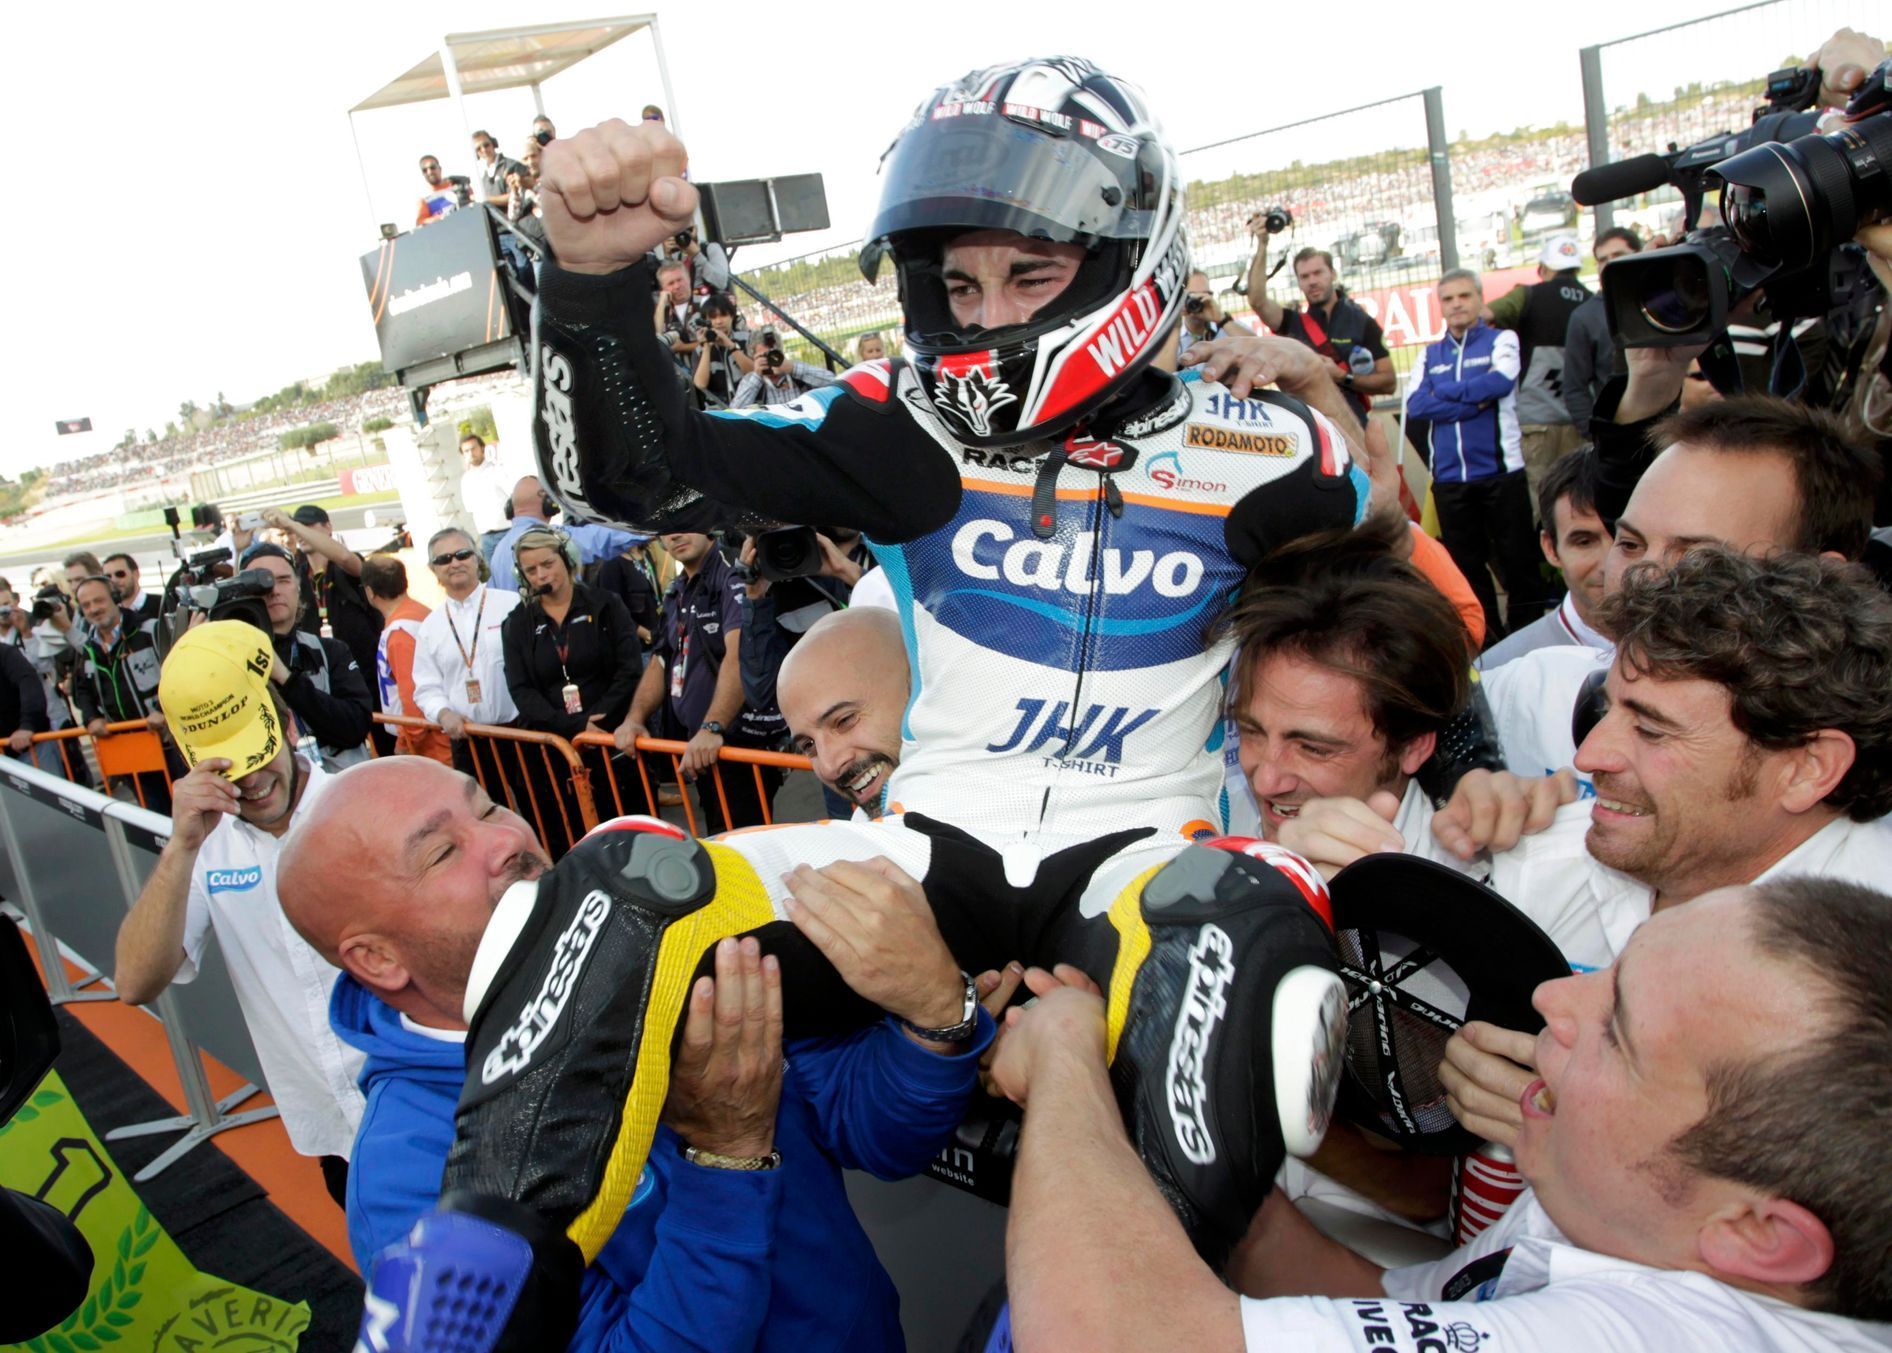 KTM Moto3 rider Vinales of Spain celebrates on podium after winning the Valencia Motorcycle Grand Prix at the Ricardo Tormo racetrack in Cheste